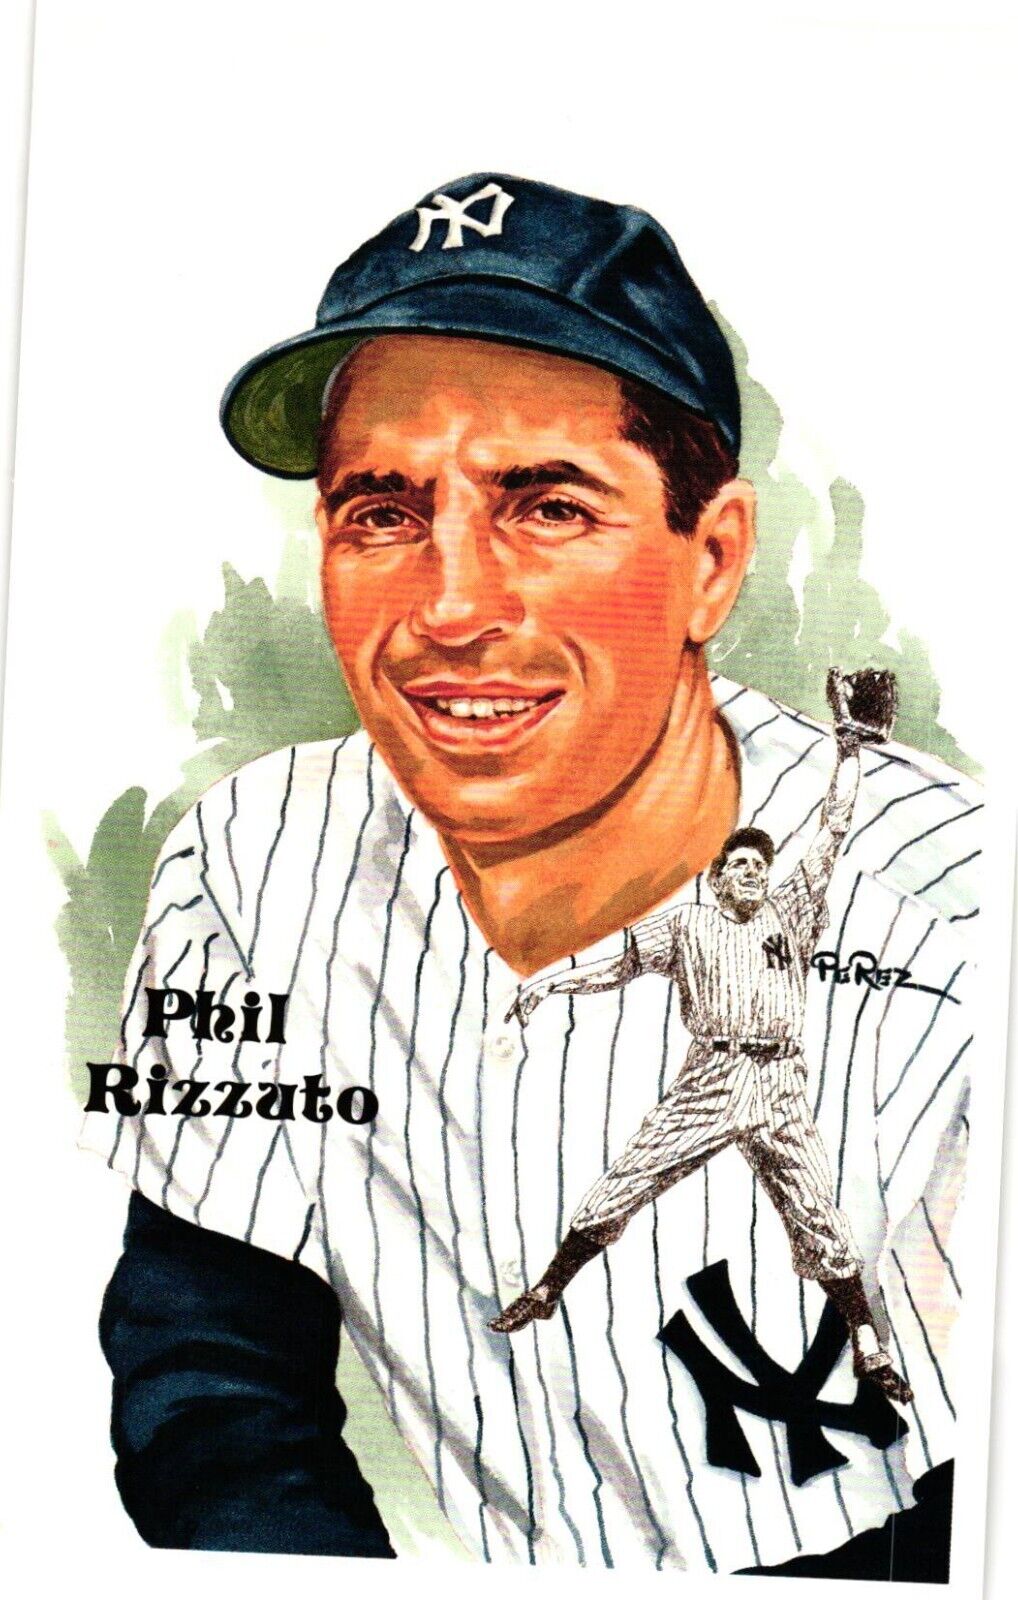 Phil Rizzuto 1980 Perez-Steele Baseball Hall of Fame Limited Edition Postcard